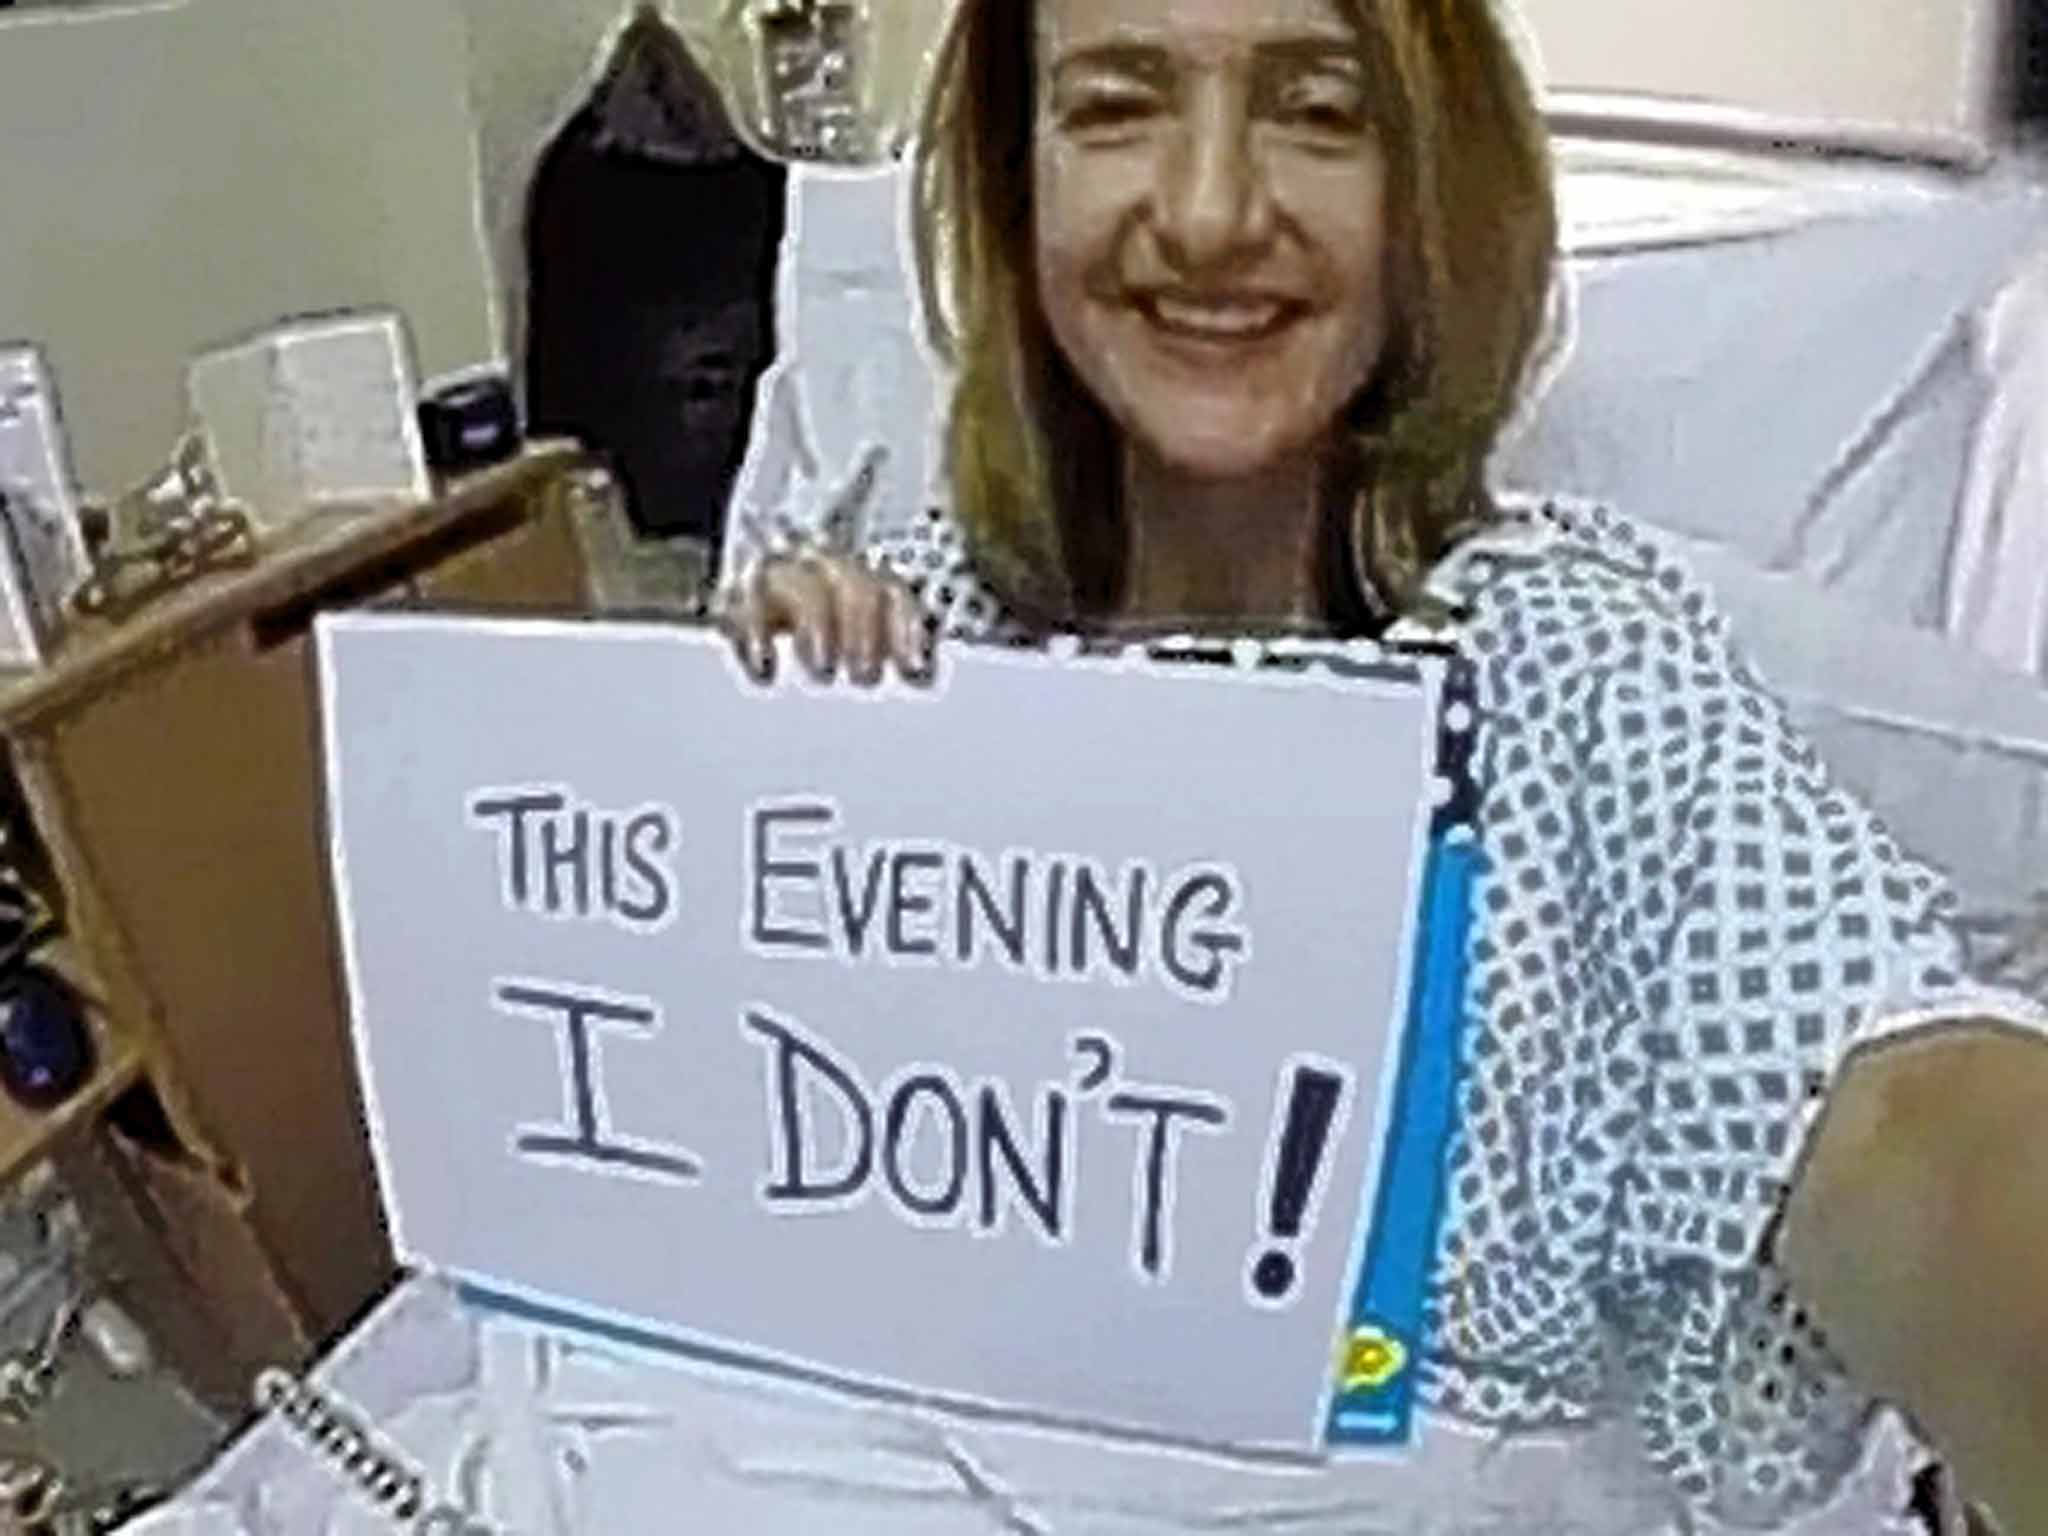 Double take: Victoria Derbyshire gives her post-op news